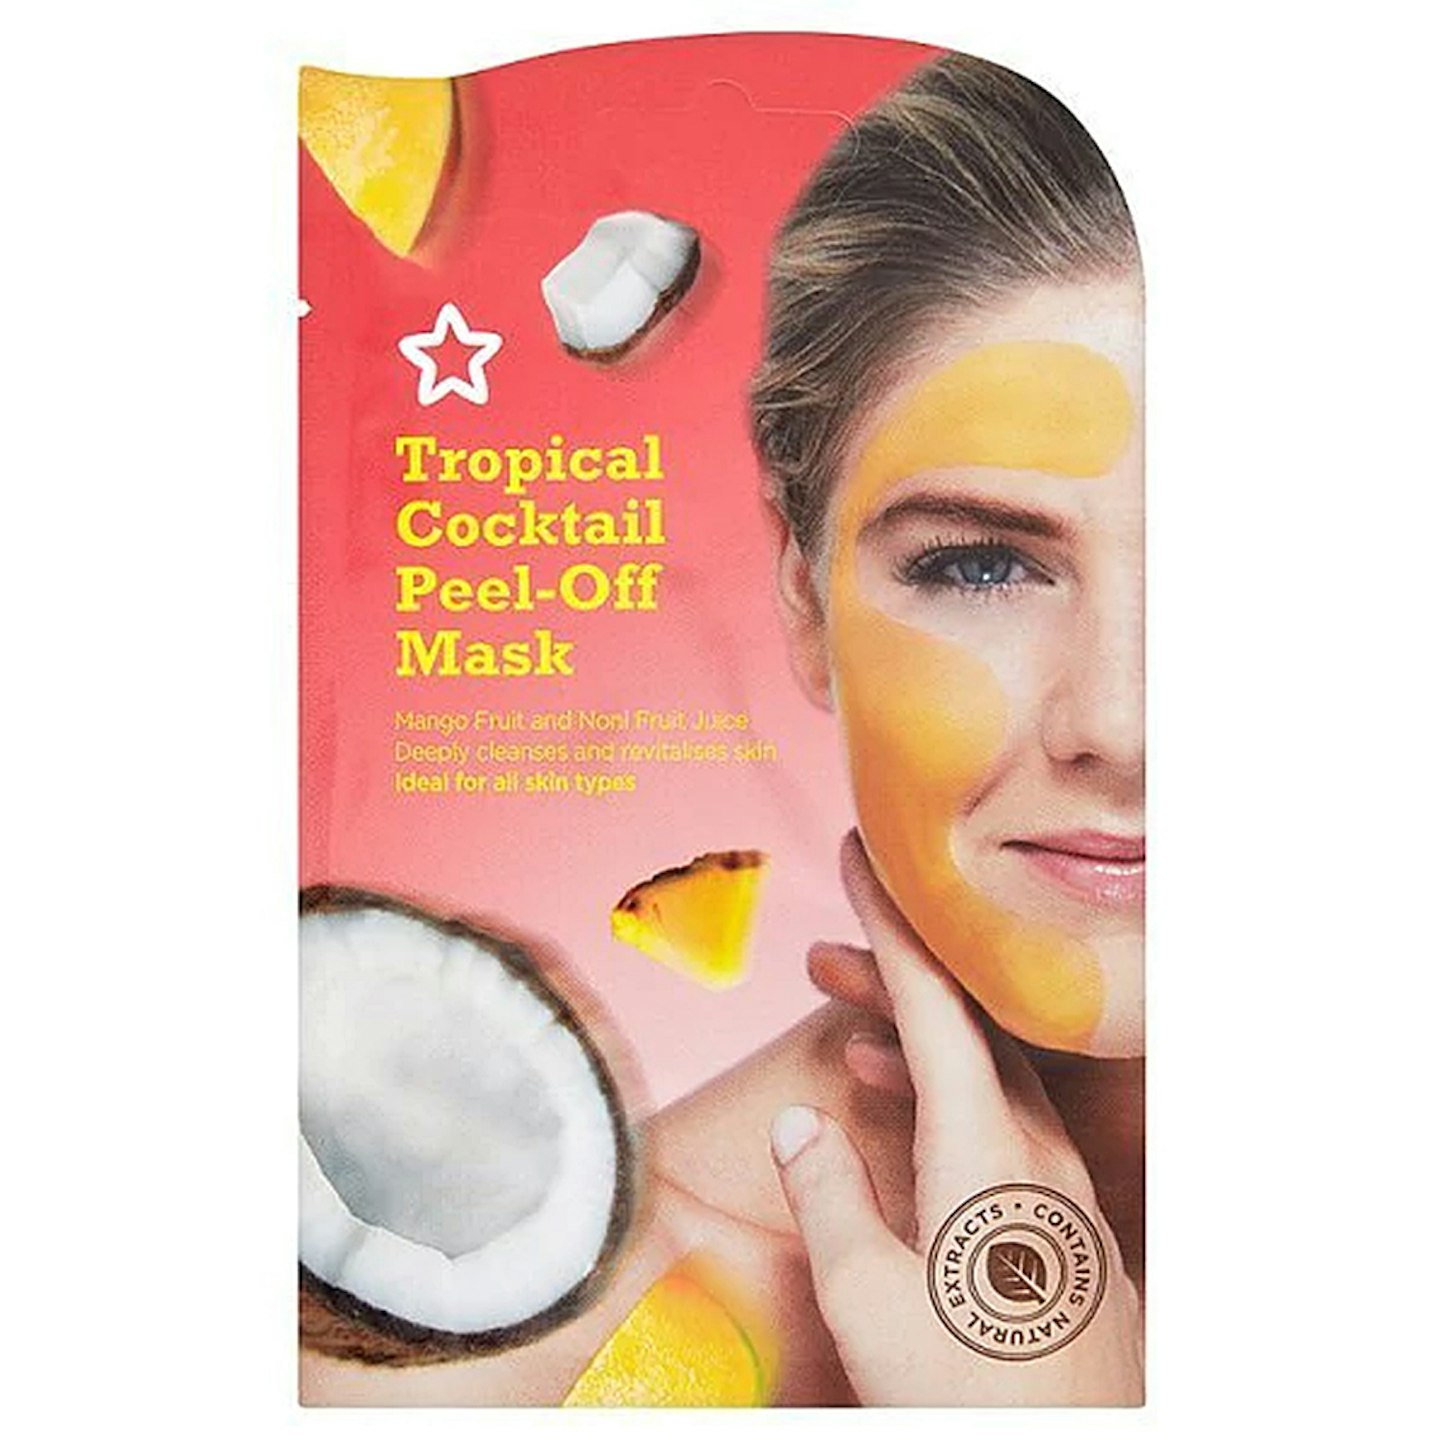 peel-off face mask